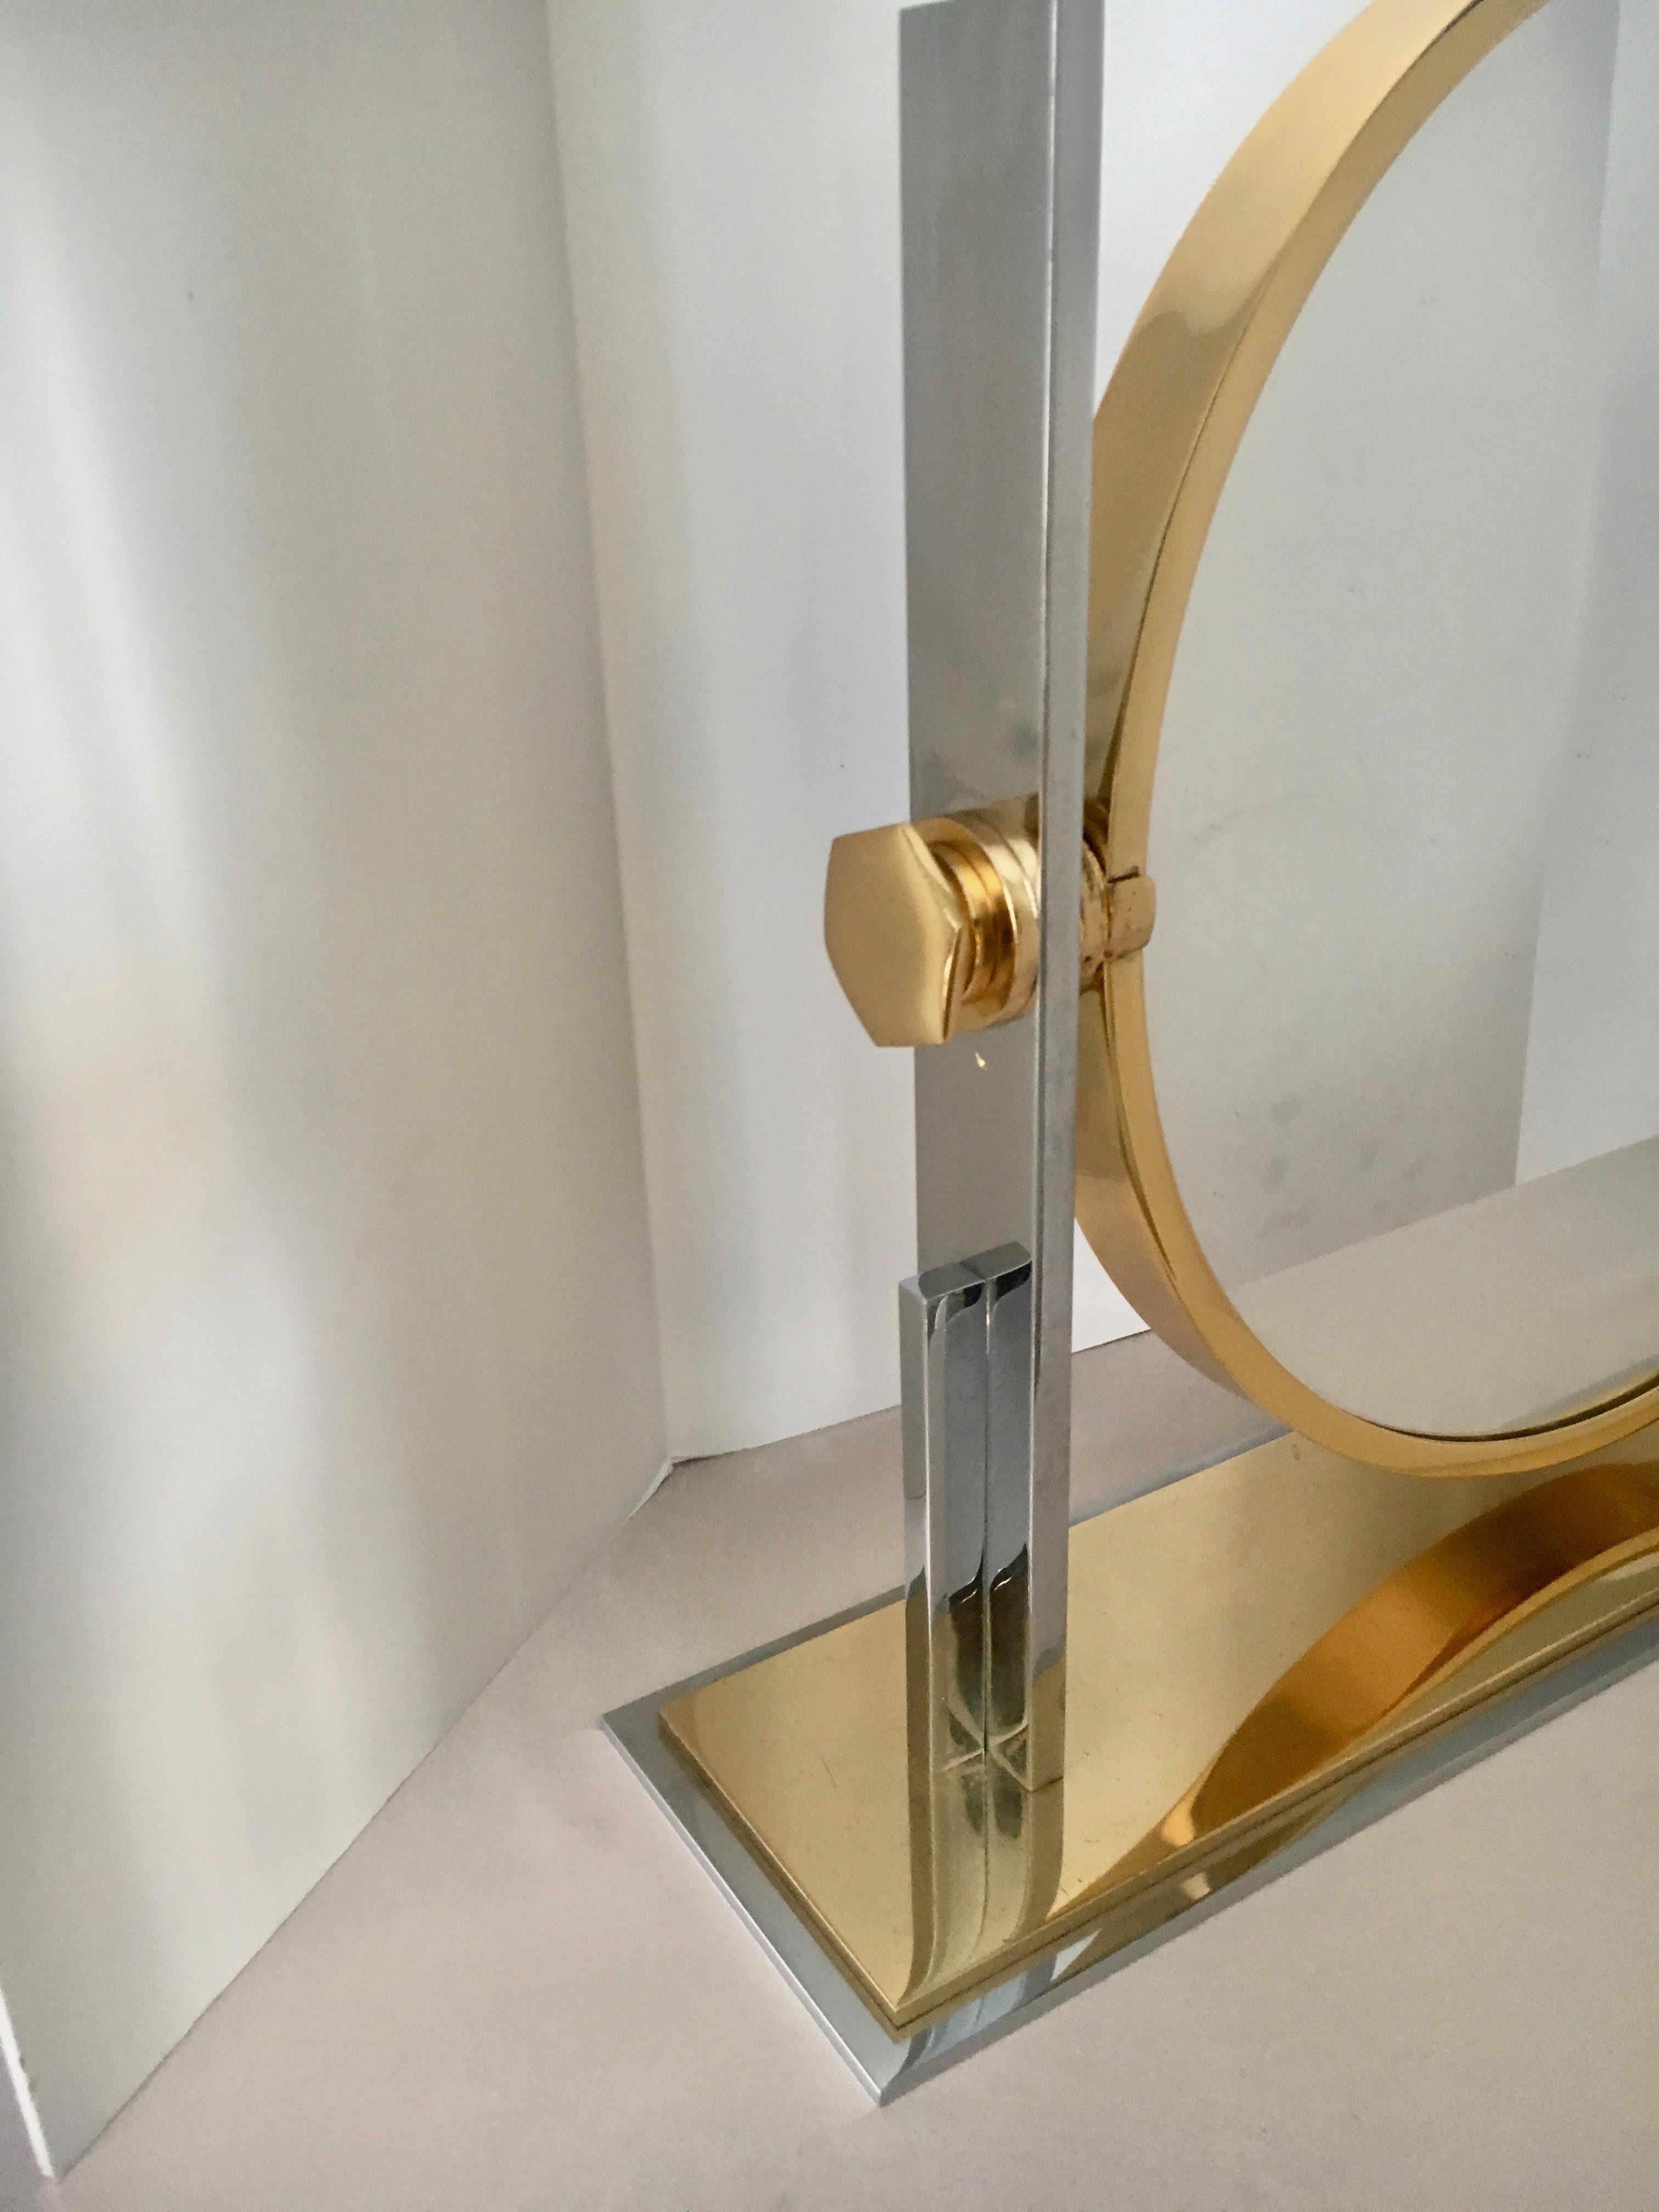 Karl Springer table mirror - a bold statement in polished brass and chrome. A 17.5 inch diameter mirror sits on a very heavy and impressive stand. The mirror tilts to desired angle with side adjustments.. Karl Springer is one of the most impressive